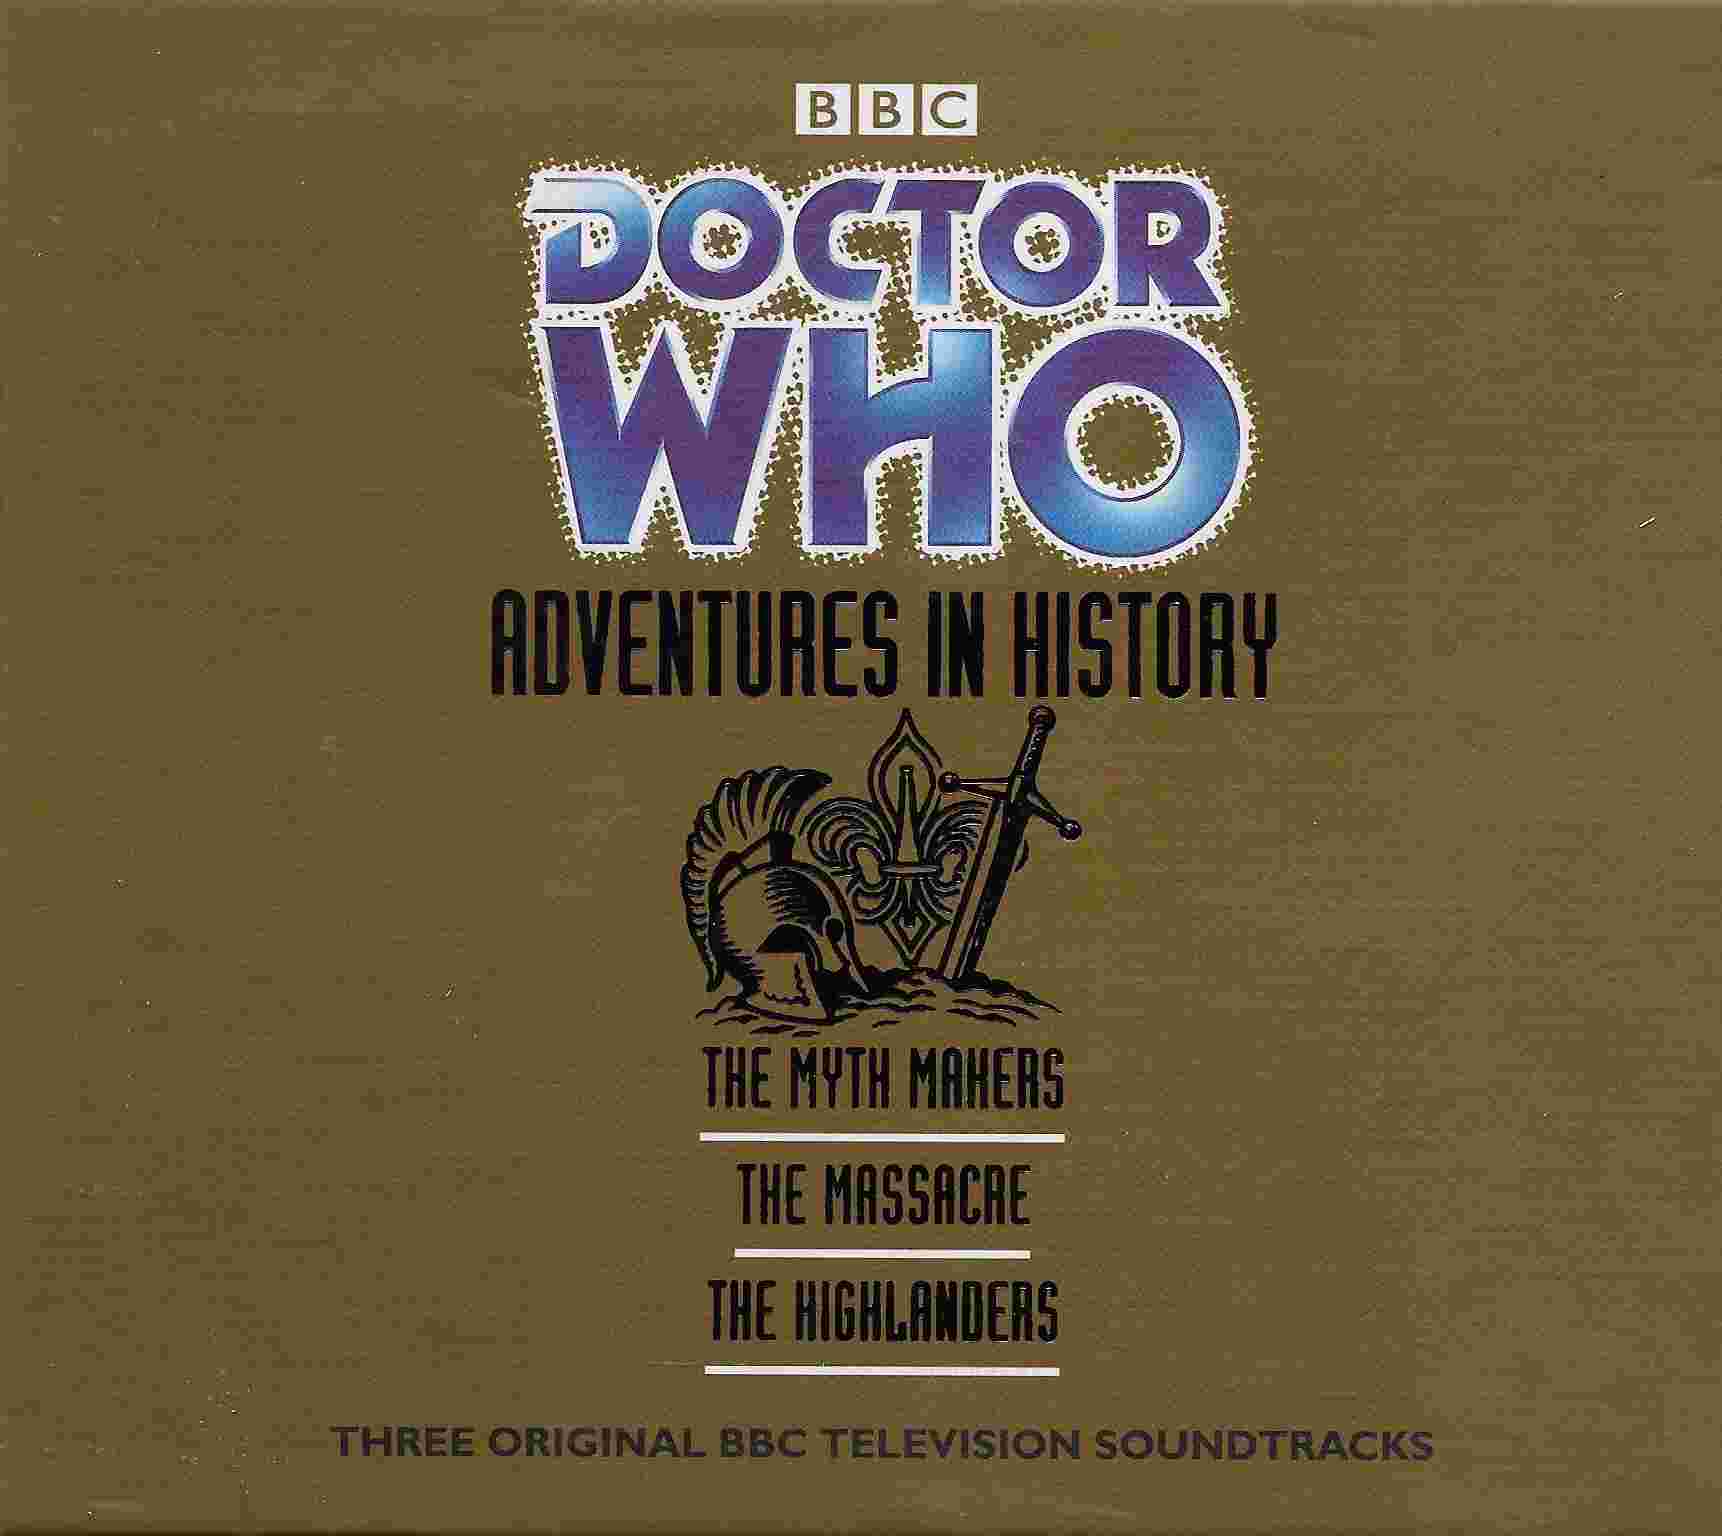 Picture of ISBN 0-563-49494-8 Doctor Who - Adventures in history by artist Donald Cotton / John Lucarotti / Gerry Davis	 from the BBC cds - Records and Tapes library